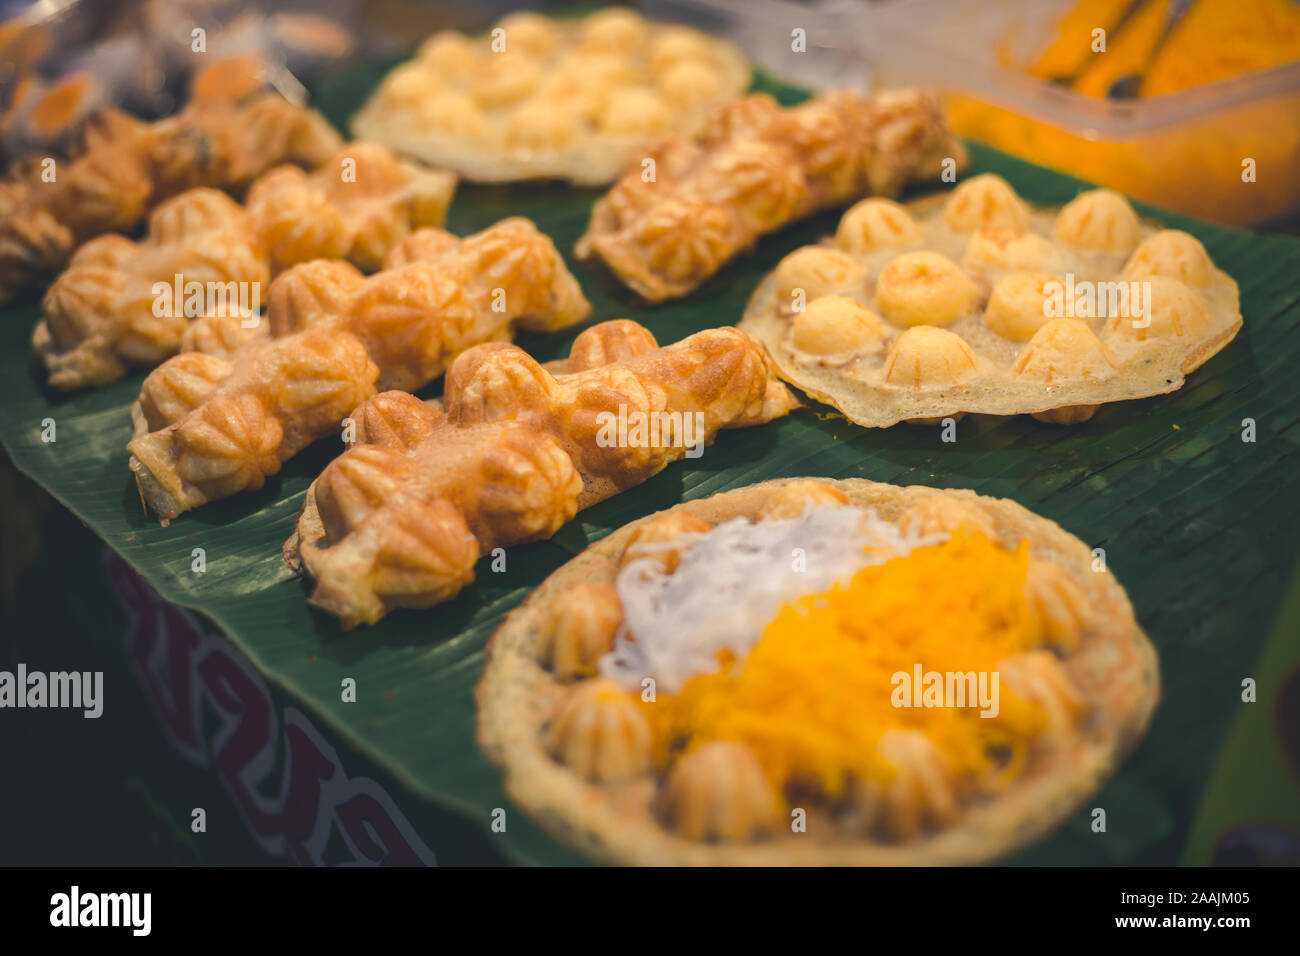 Thai dessert made with flour look yellow and smell good Stock Photo